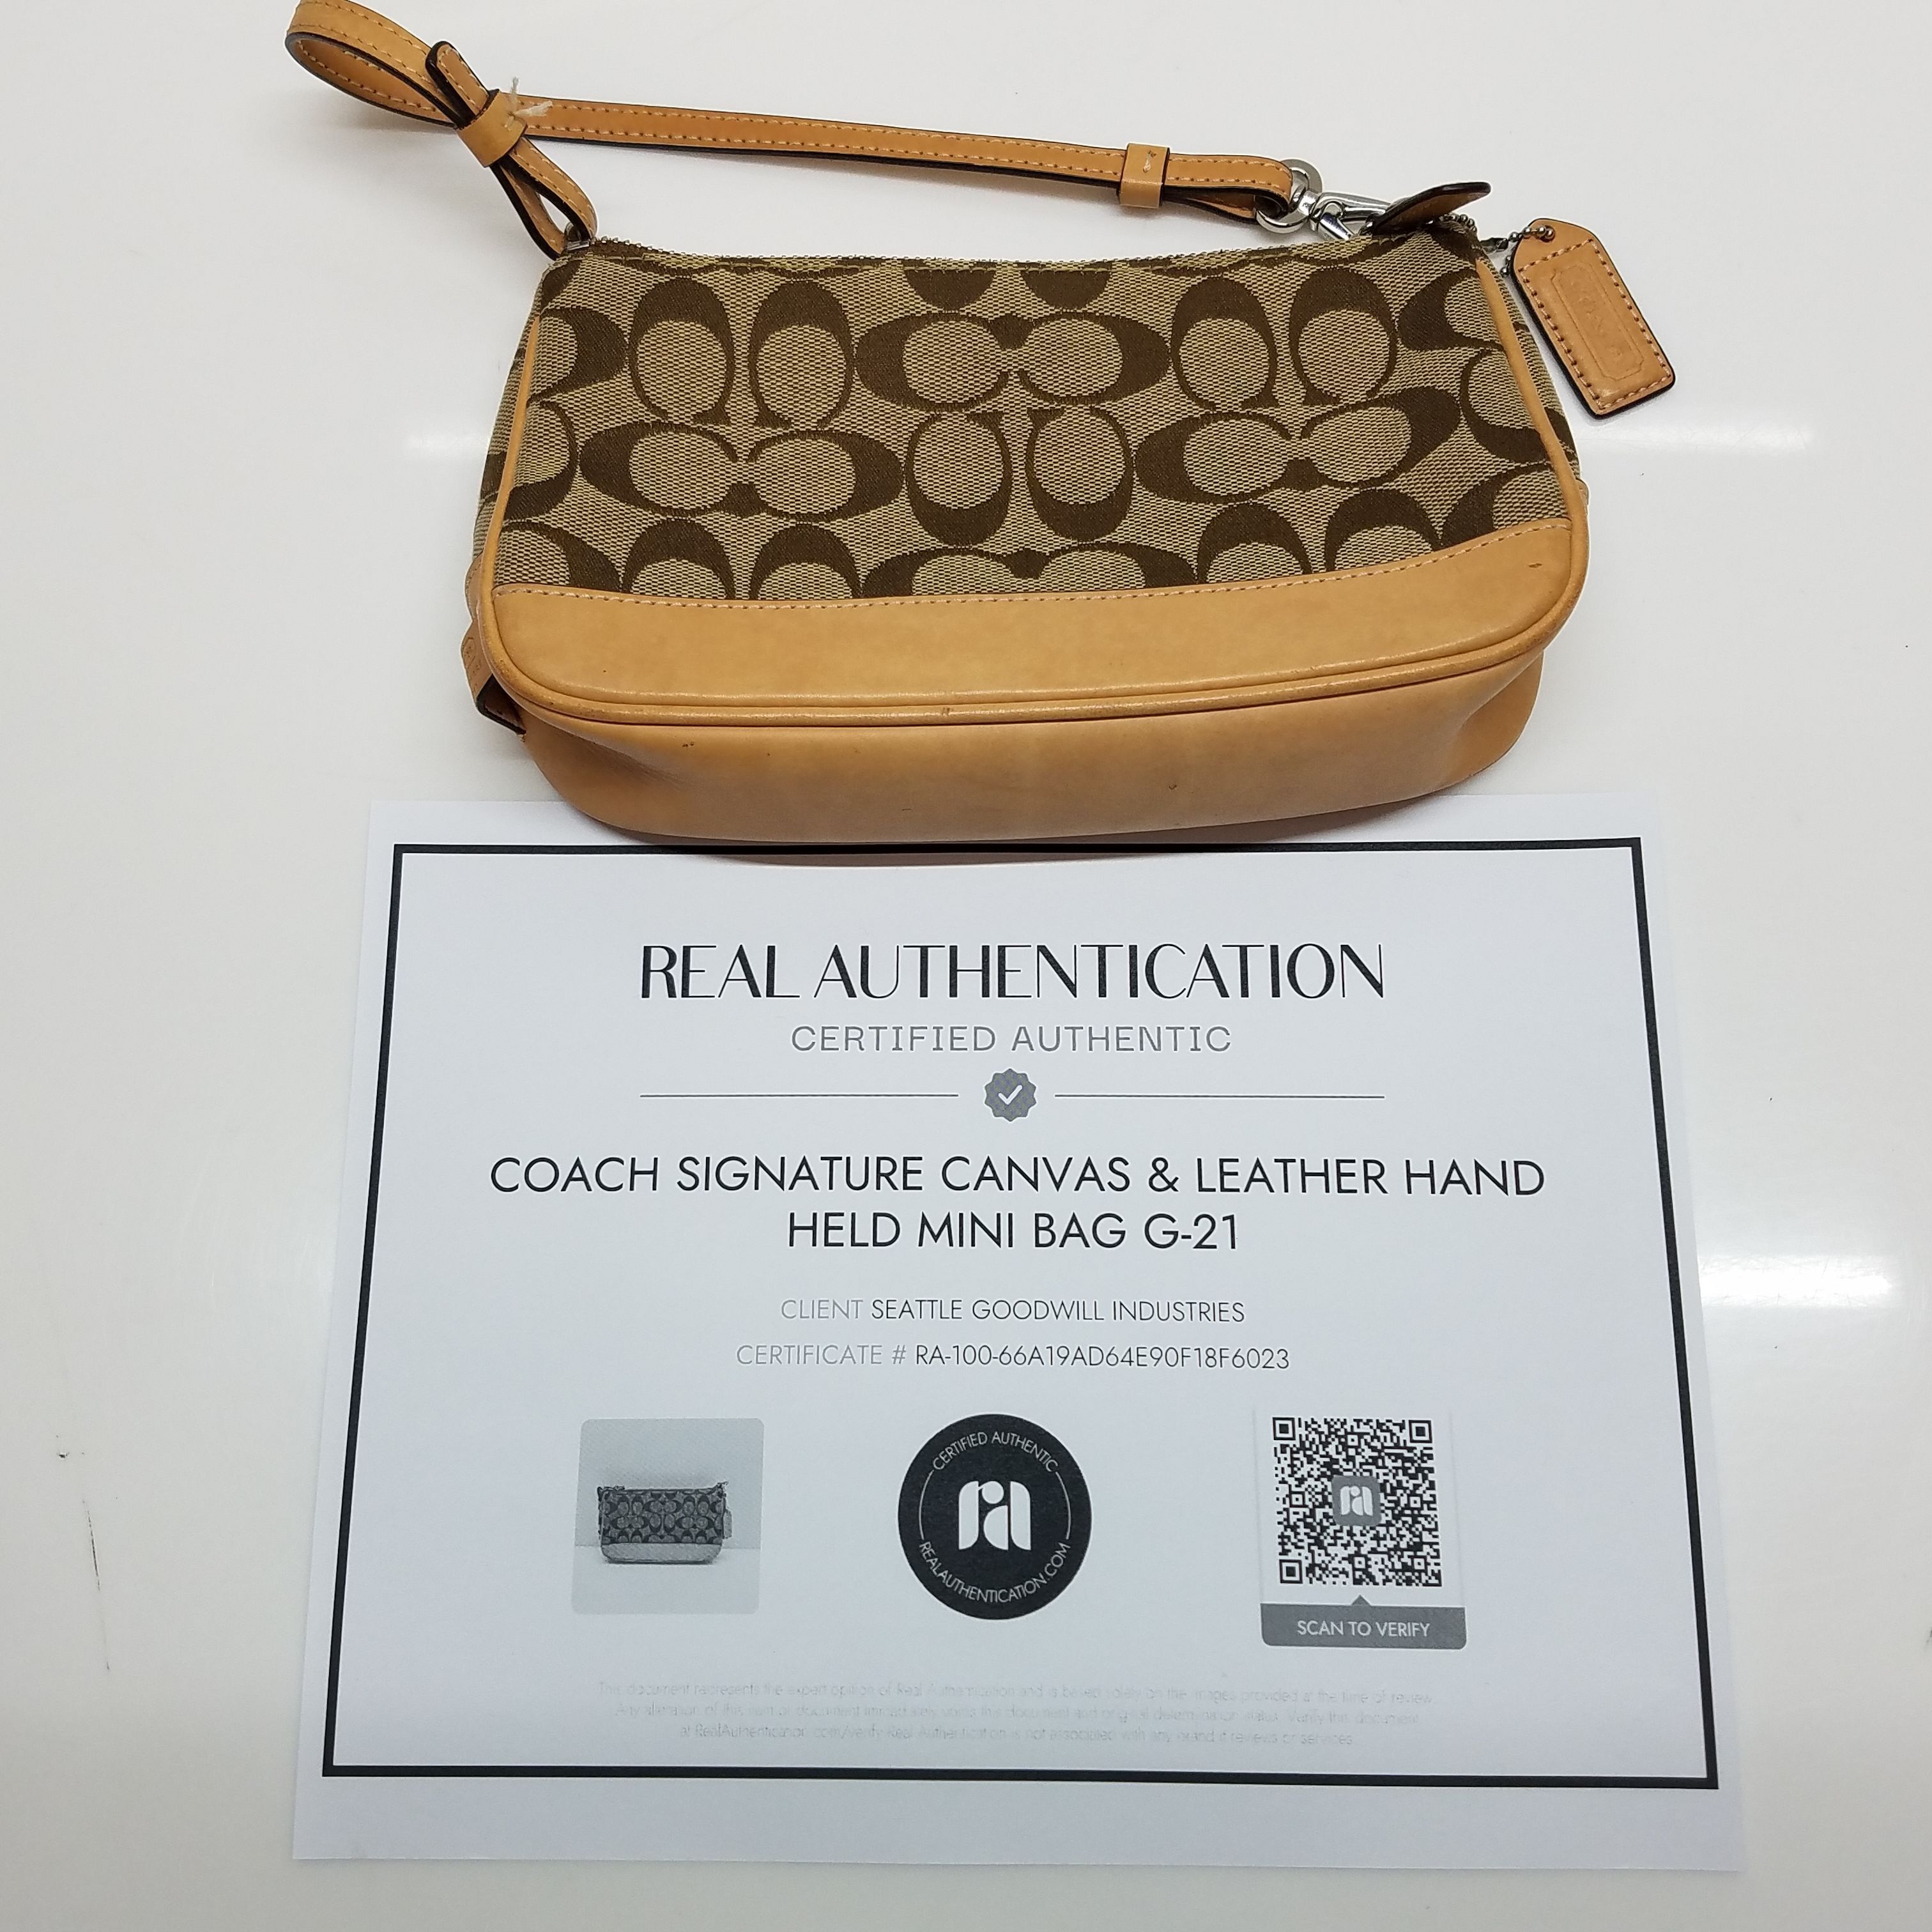 Coach Authenticated Leather Clutch Bag